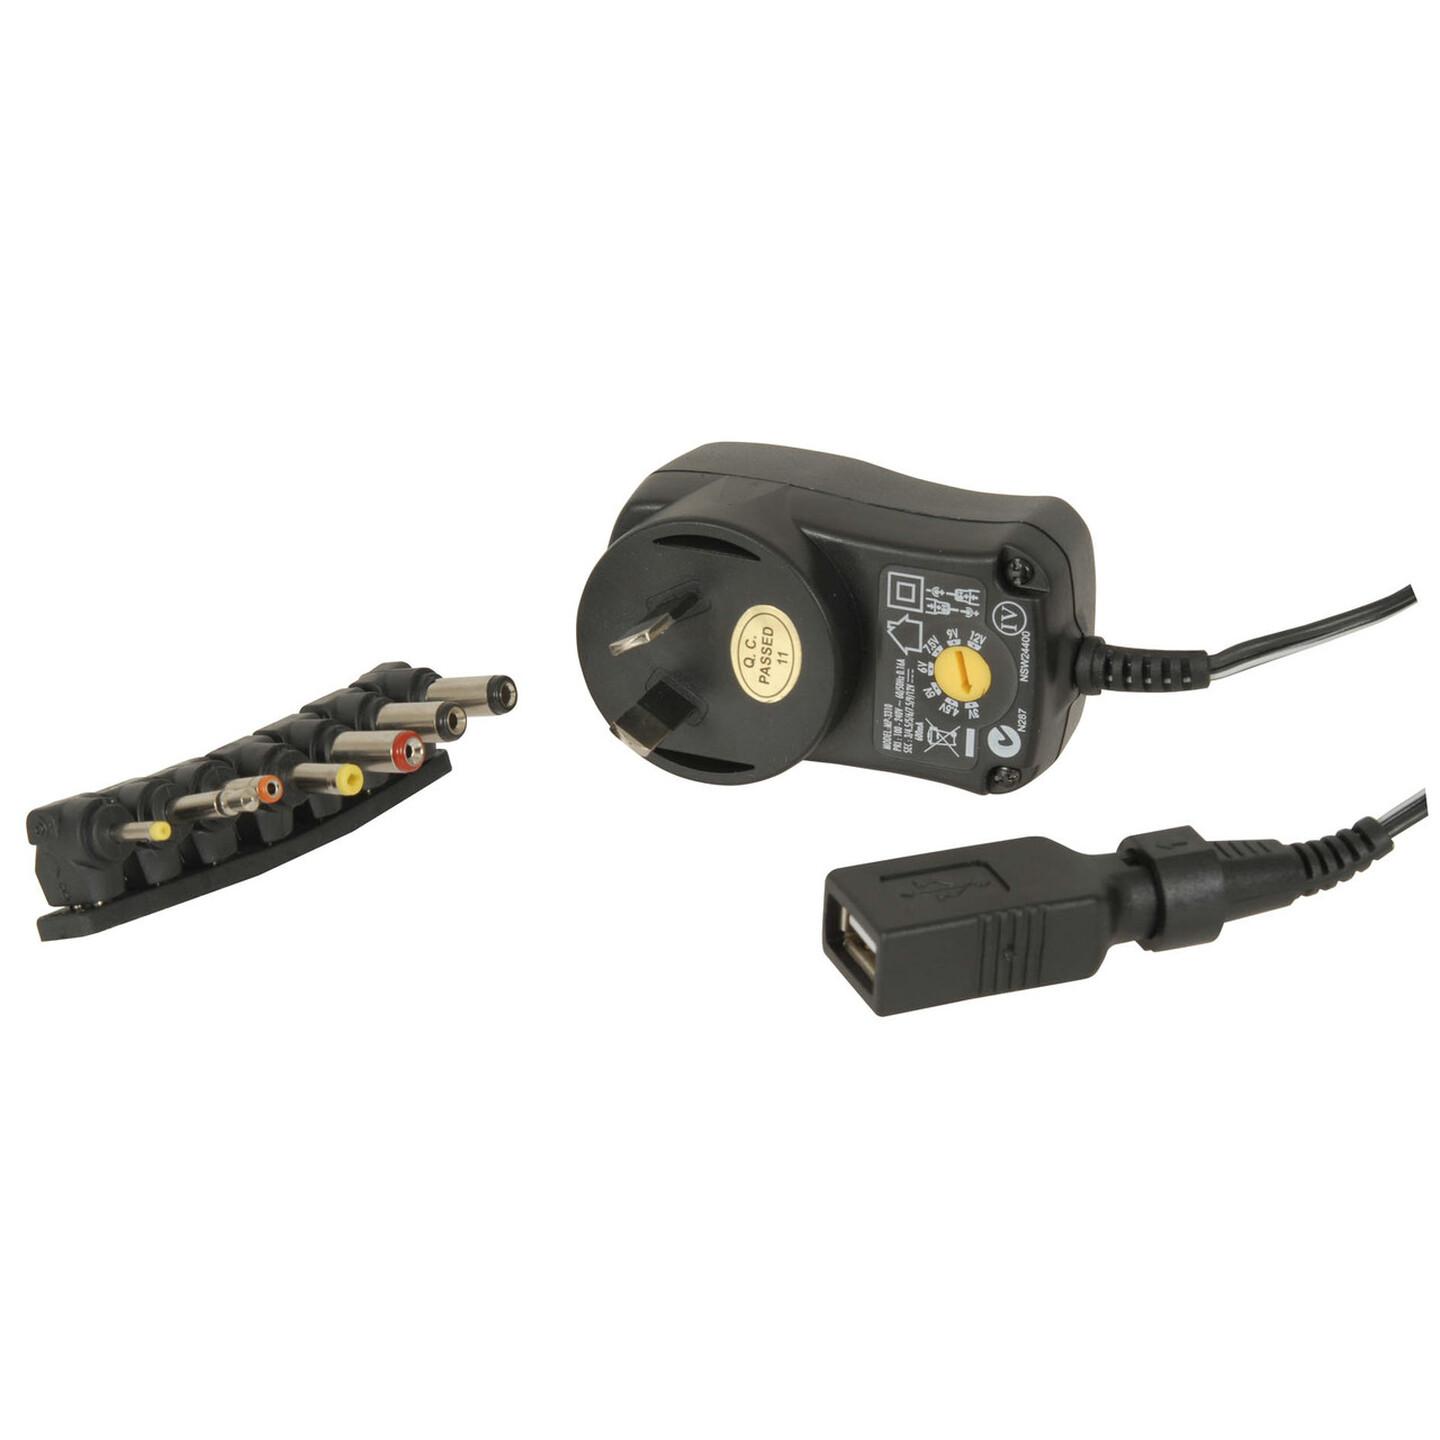 3-12V DC 7.2W Power Supply 7DC Plugs and USB Outlet